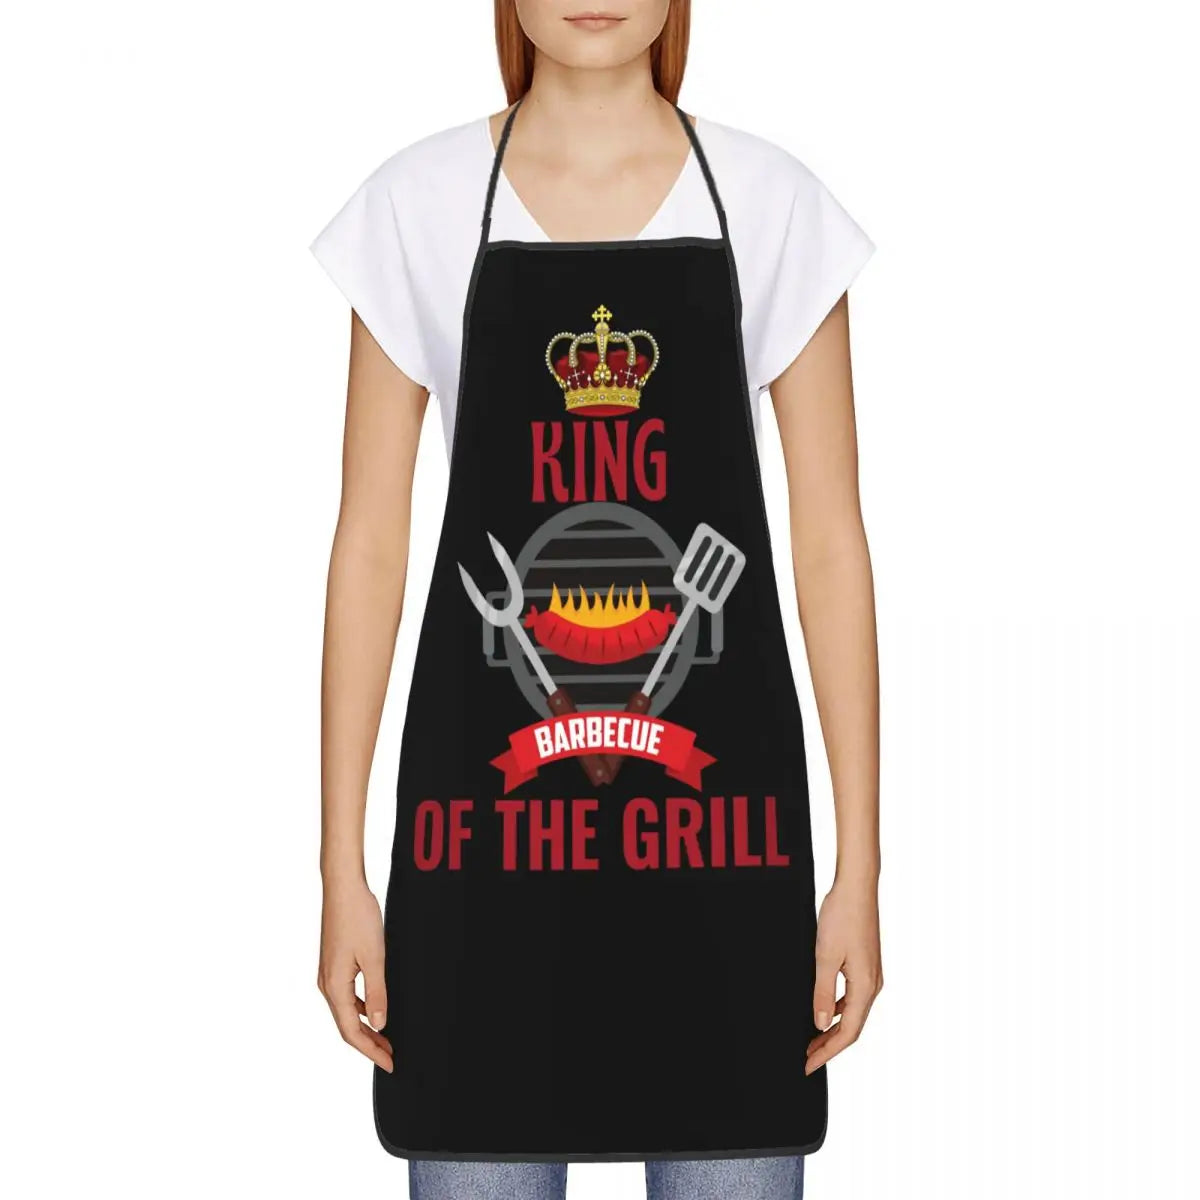 BBQ Master King Of The Grill Bib Apron Women Men Unisex Kitchen Chef Barbecue Lover Tablier Cuisine for Cooking Baking Gardening